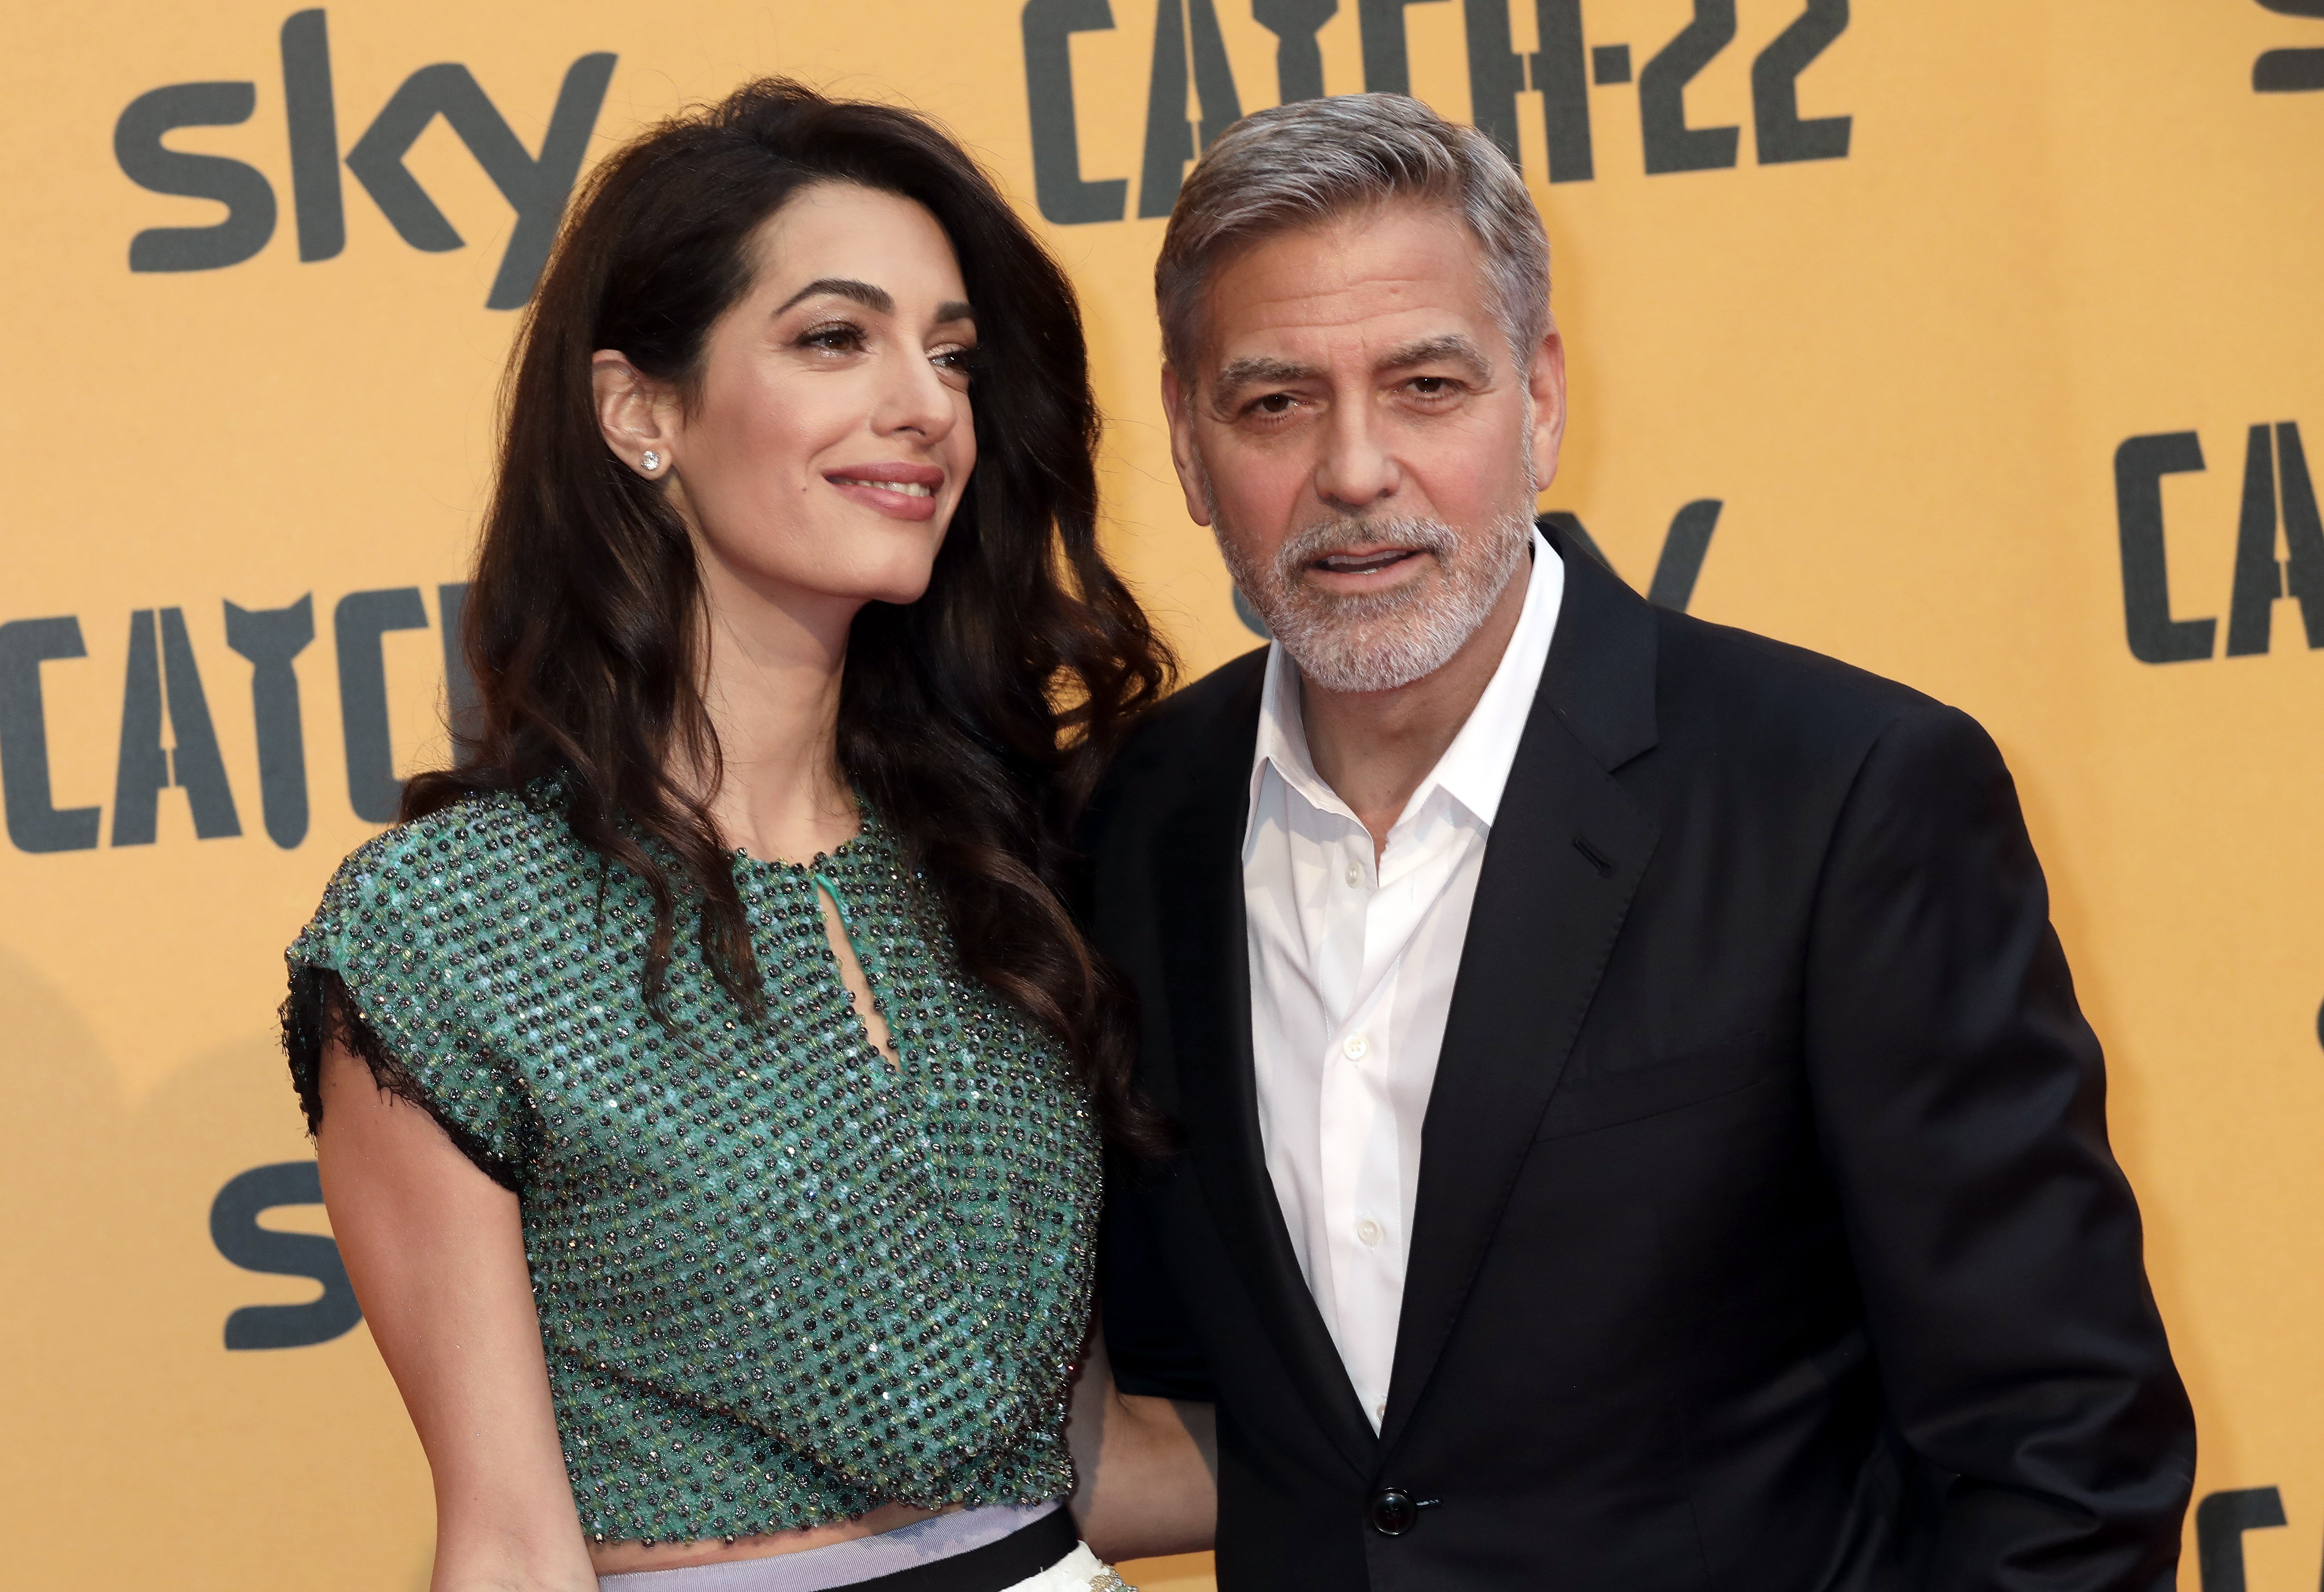 Amal and George Clooney attend 'Catch-22' Photocall on May 13, 2019, in Rome, Italy. | Source: Getty Images.